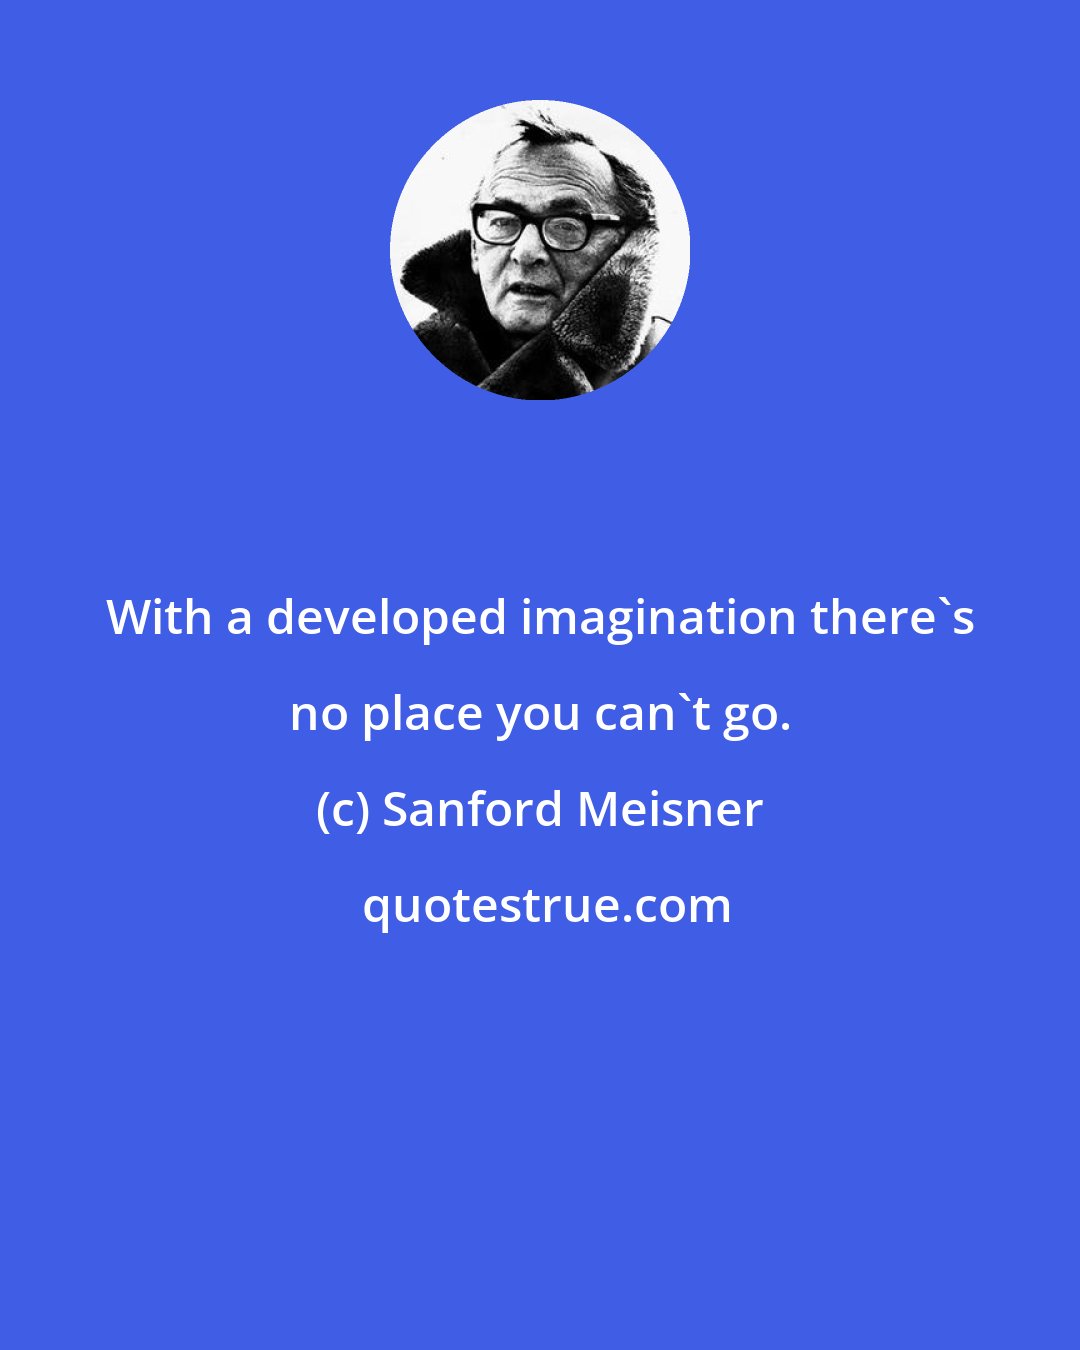 Sanford Meisner: With a developed imagination there's no place you can't go.